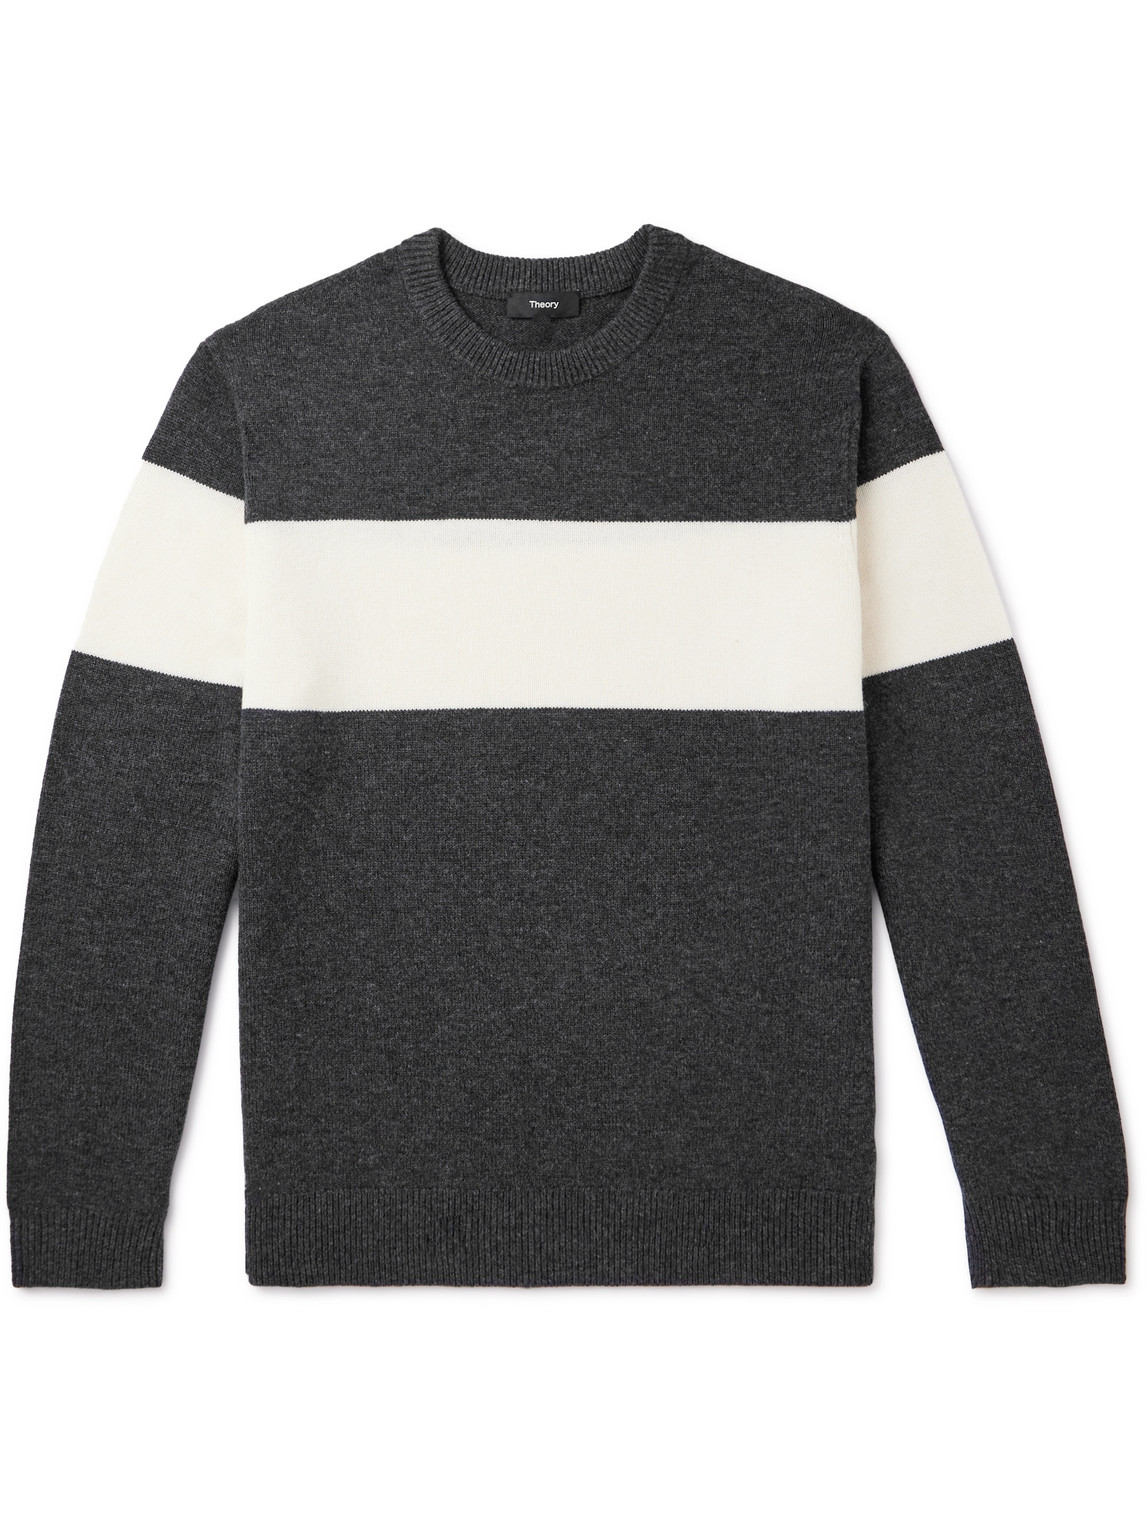 Hilles Striped Wool-Blend Sweater